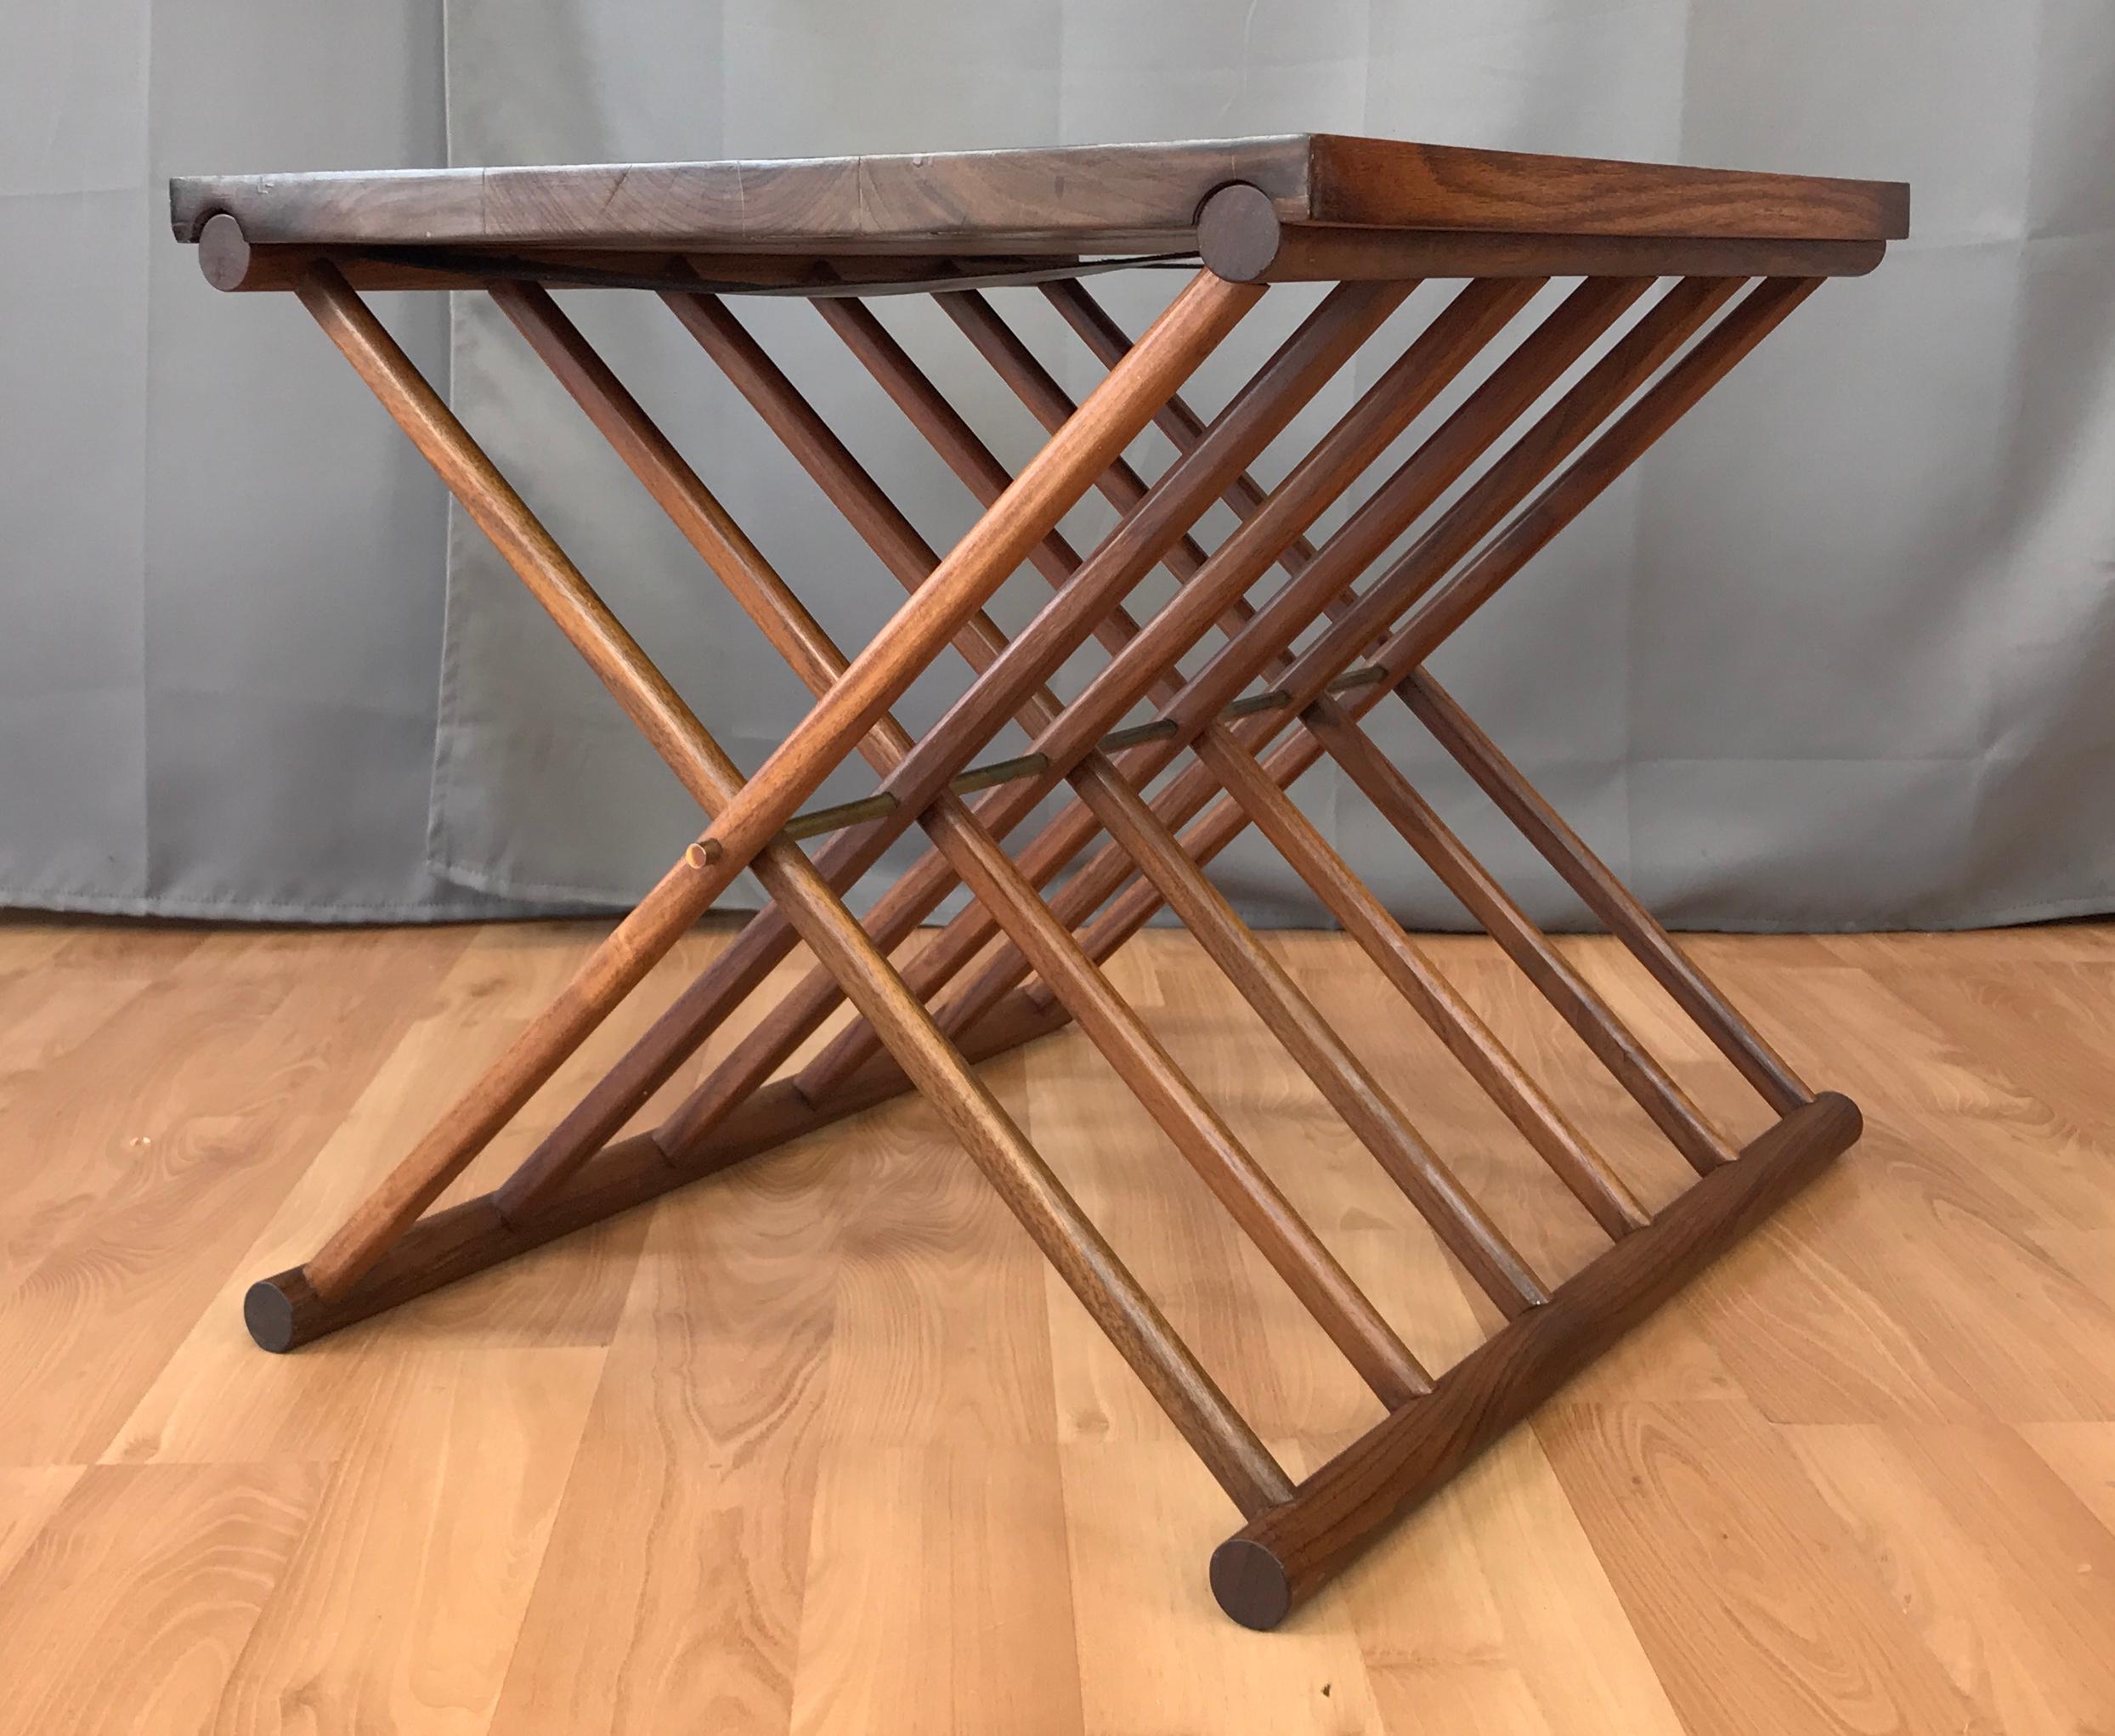 A very handsomely crafted, uncommon Danish modern rosewood occasional or side table with folding Campaign style X-base and removable top. 

Base features a solid rosewood dowel construction that pivots on a patinated solid brass rod. Exceptionally